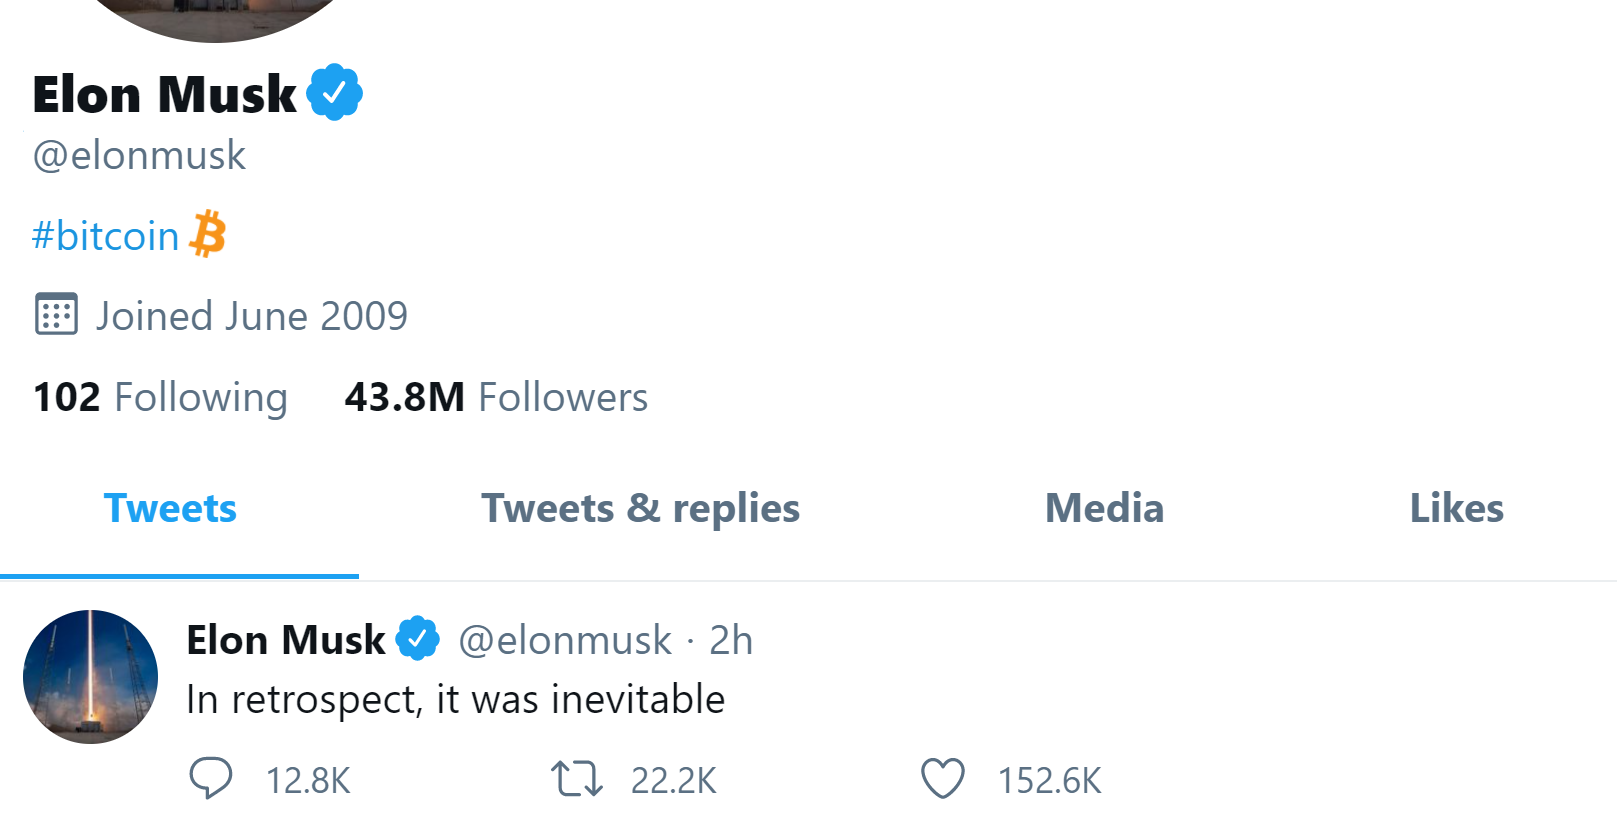 Elon Musk Changes Twitter Profile To Bitcoin, Tweets 'It Was Inevitable' —  Btc Price Skyrockets – Bitcoin News